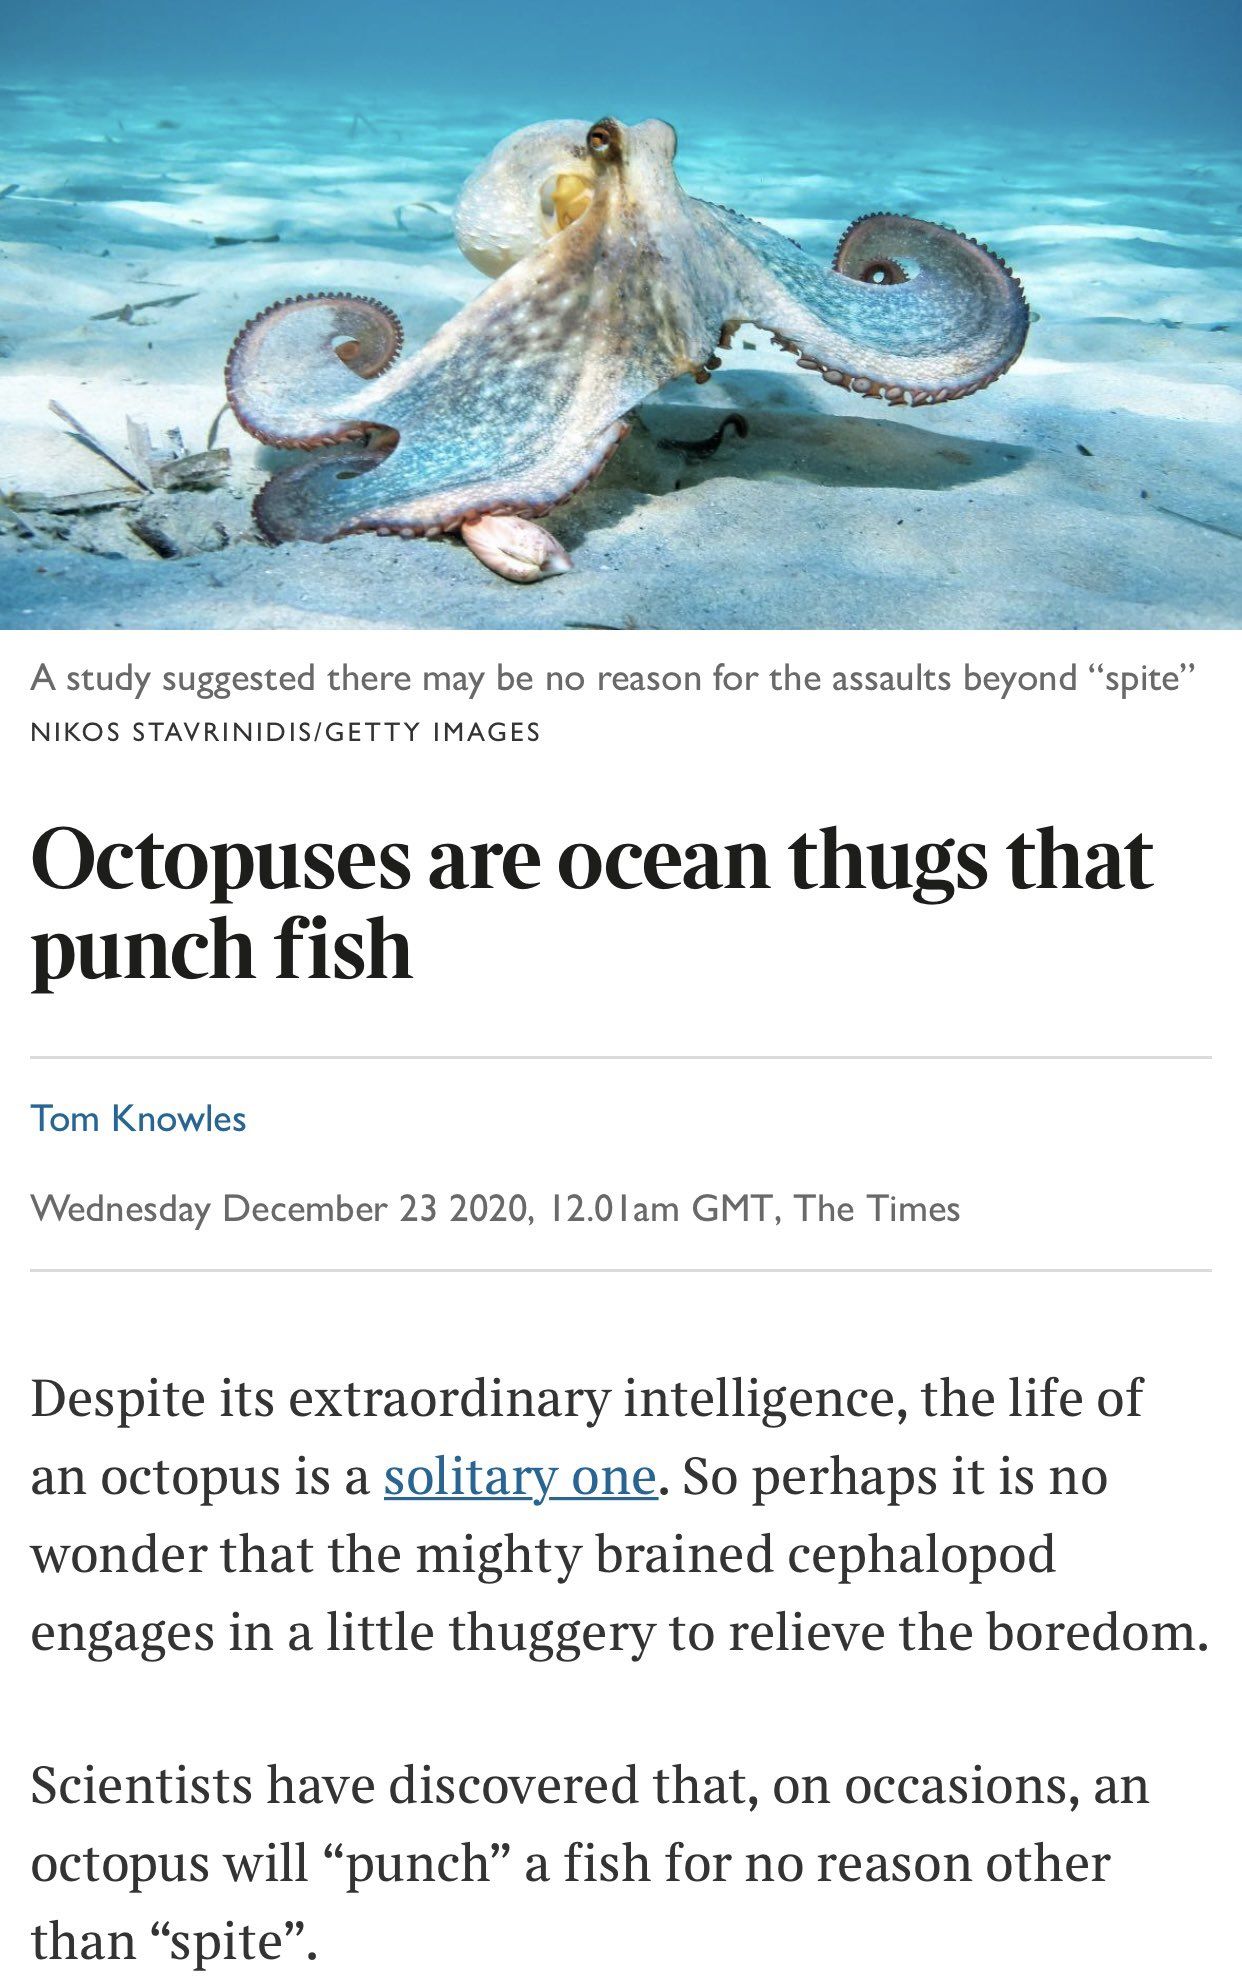 The fish community has had enough with the octopus abuse